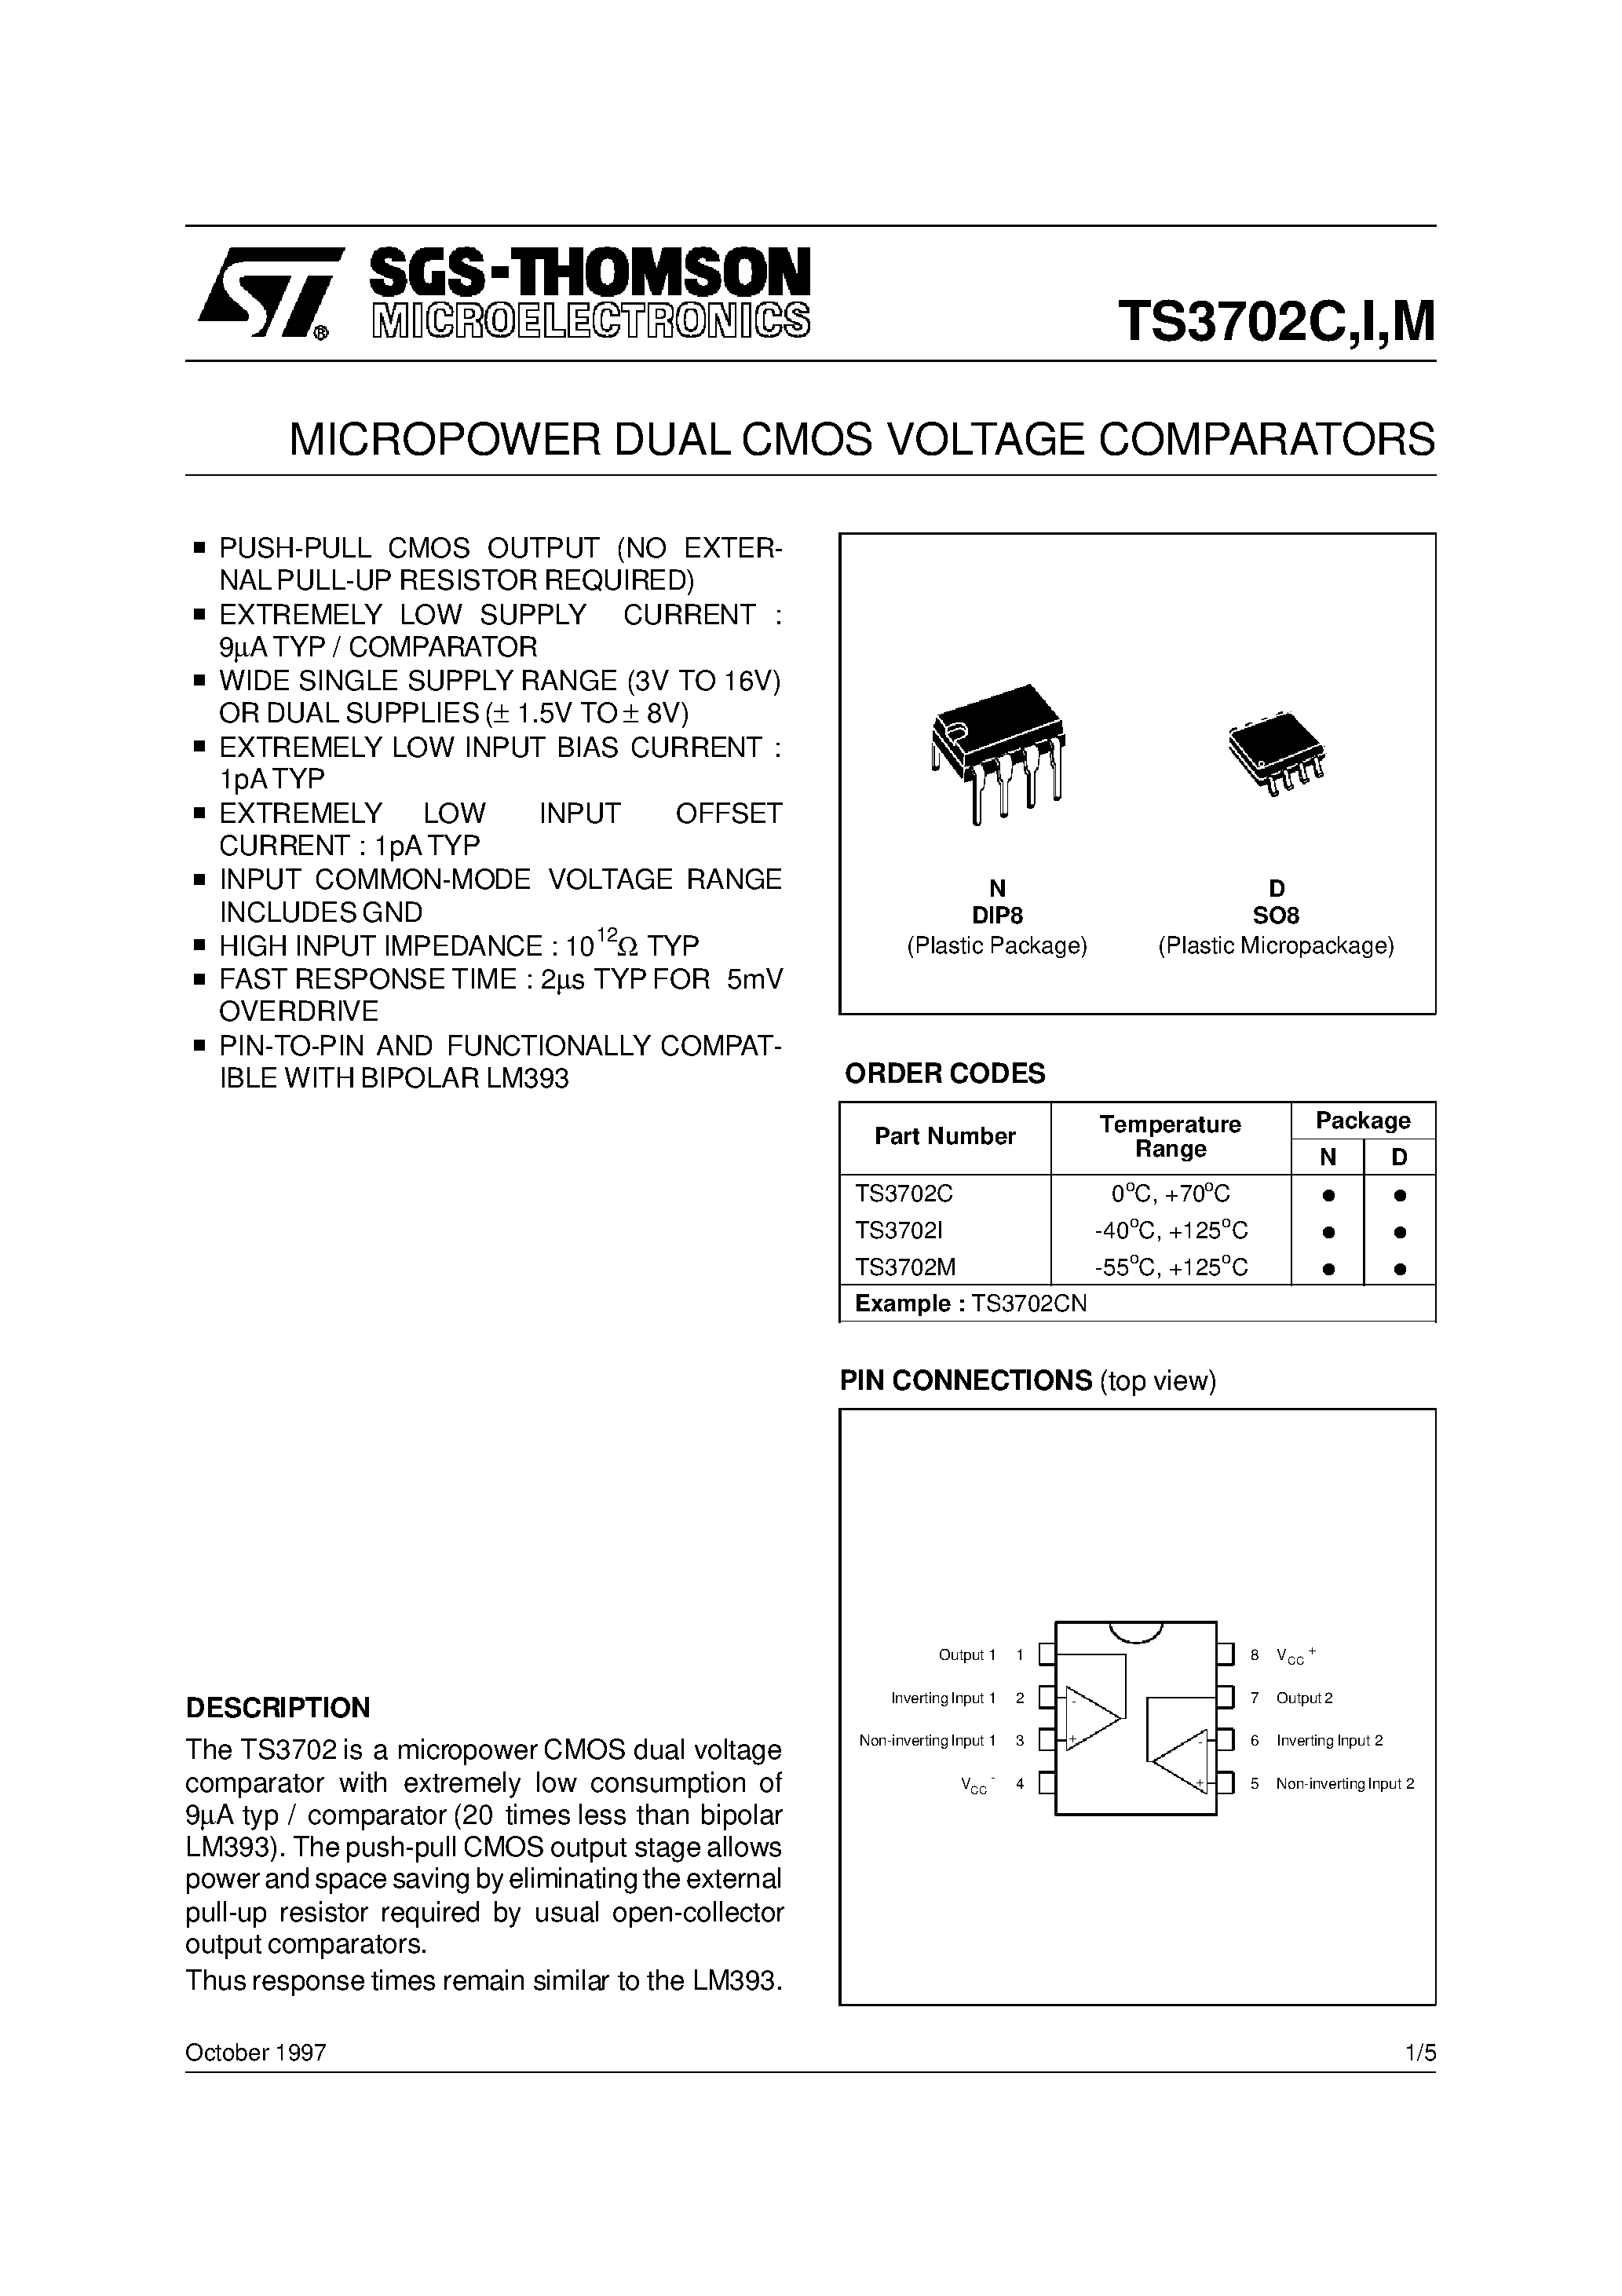 Datasheet TS3702I - MICROPOWER DUAL CMOS VOLTAGE COMPARATORS page 1